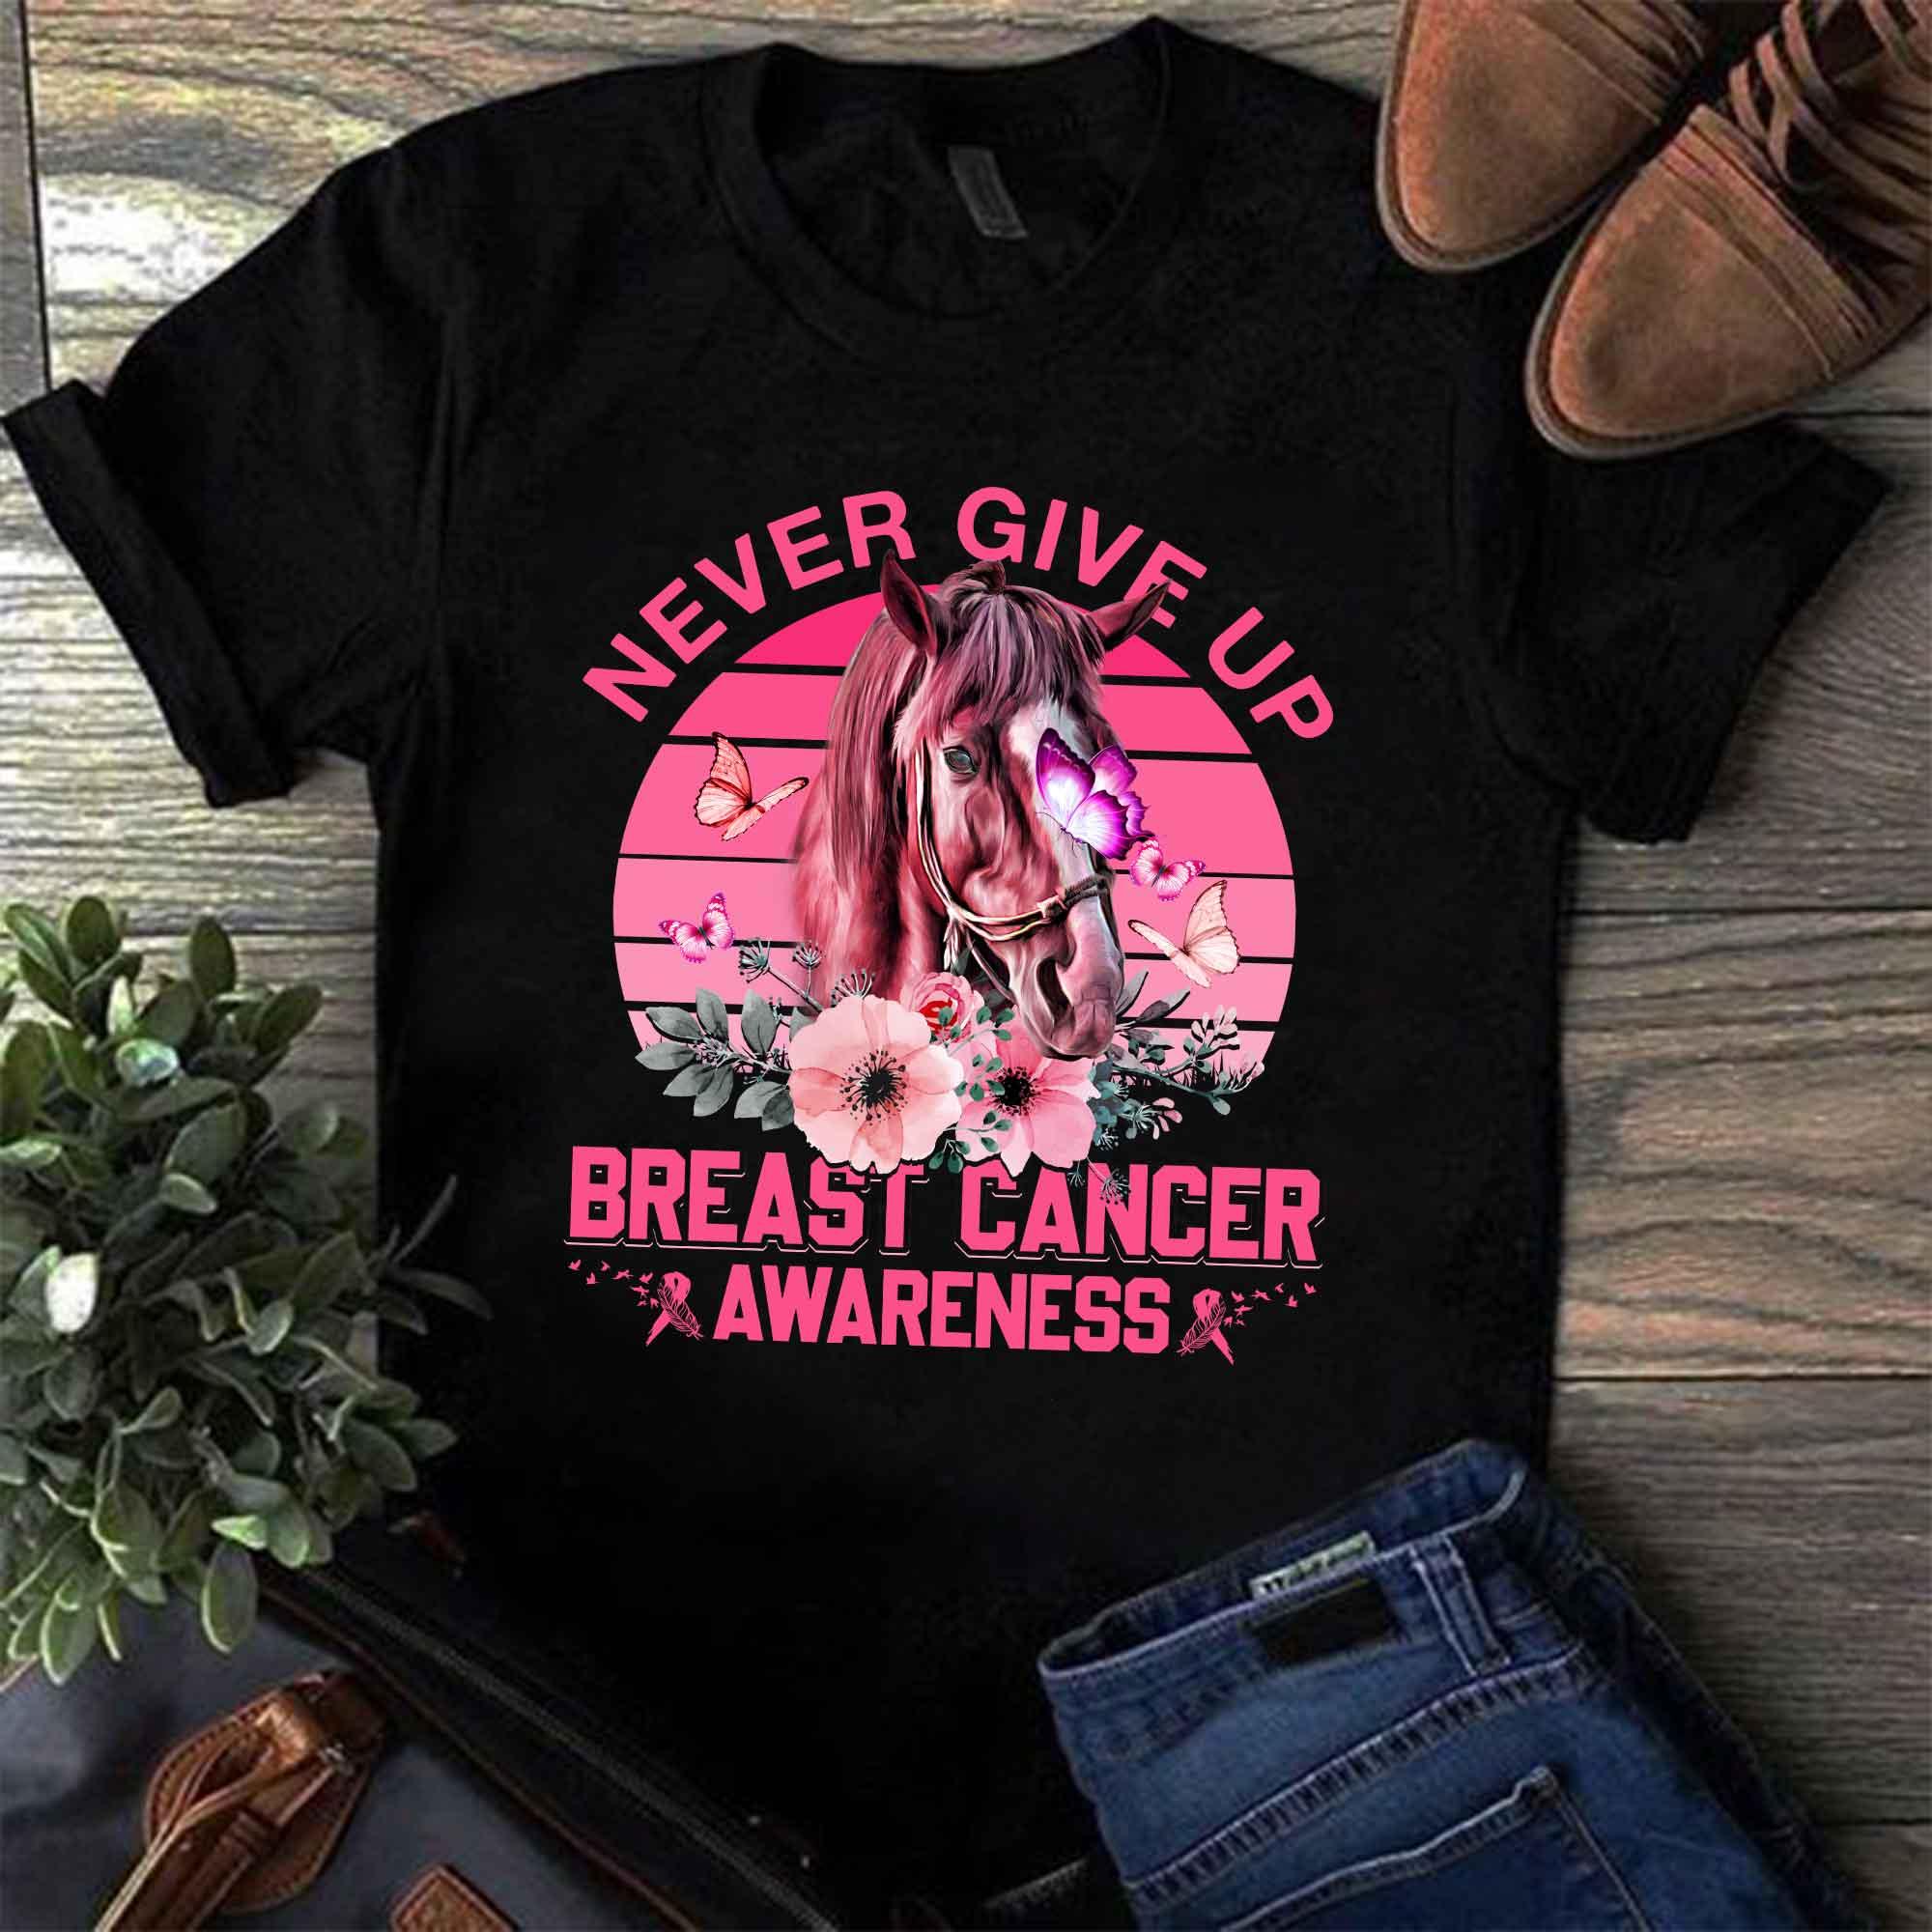 Never give up - Breast cancer awareness, horse breast cancer